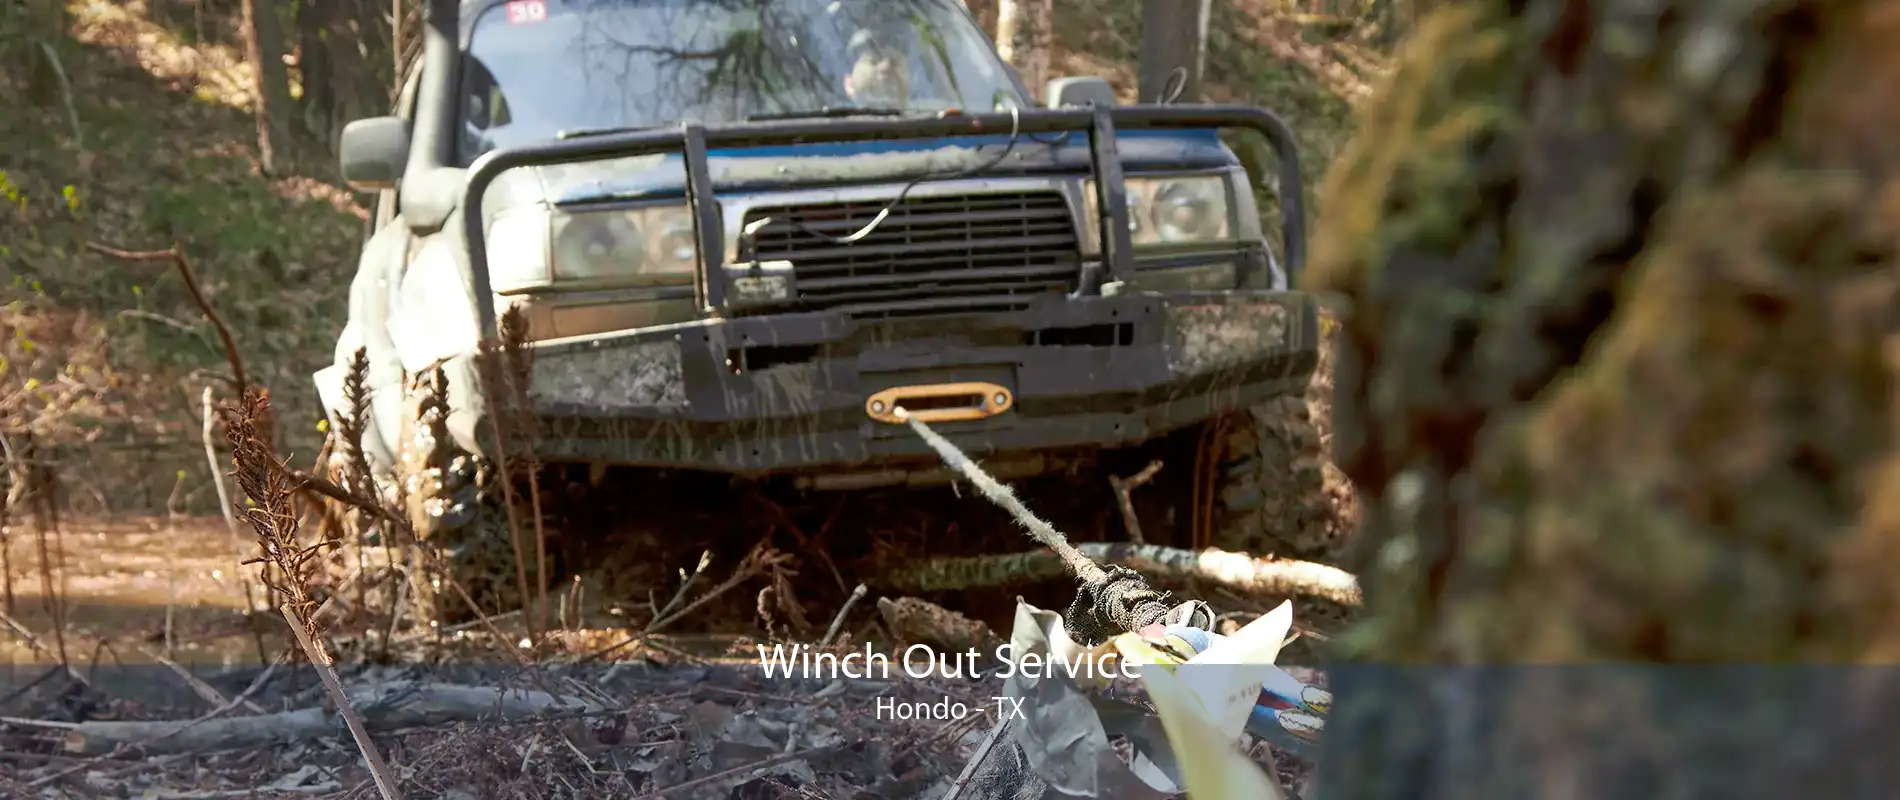 Winch Out Service Hondo - TX